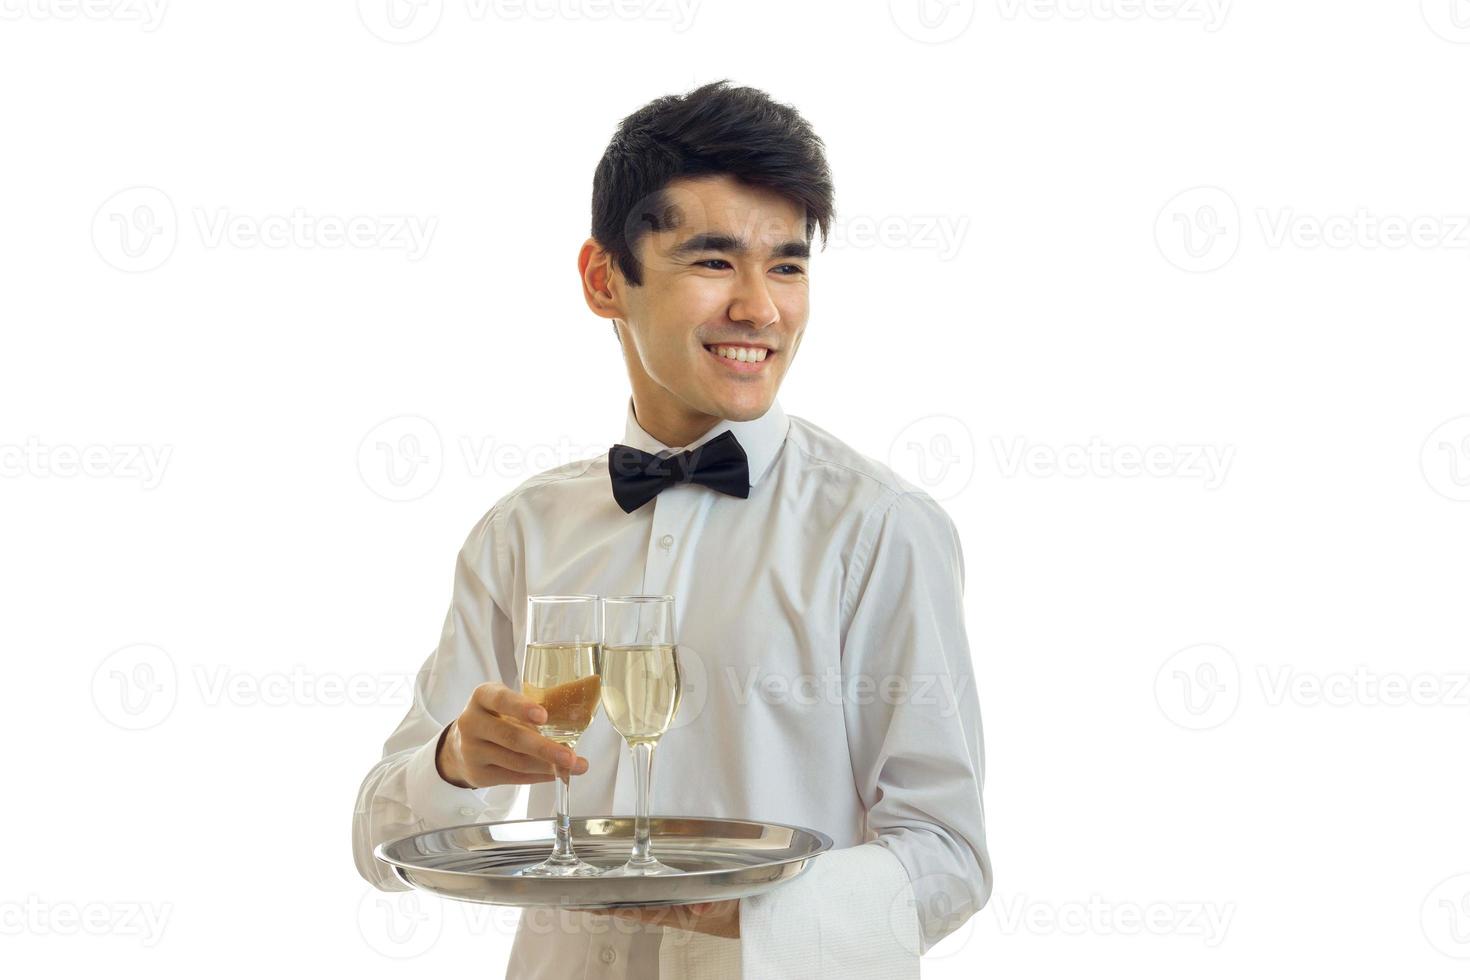 Hilarious cute young waiter looks away laughing and holding wine glasses on a tray that photo